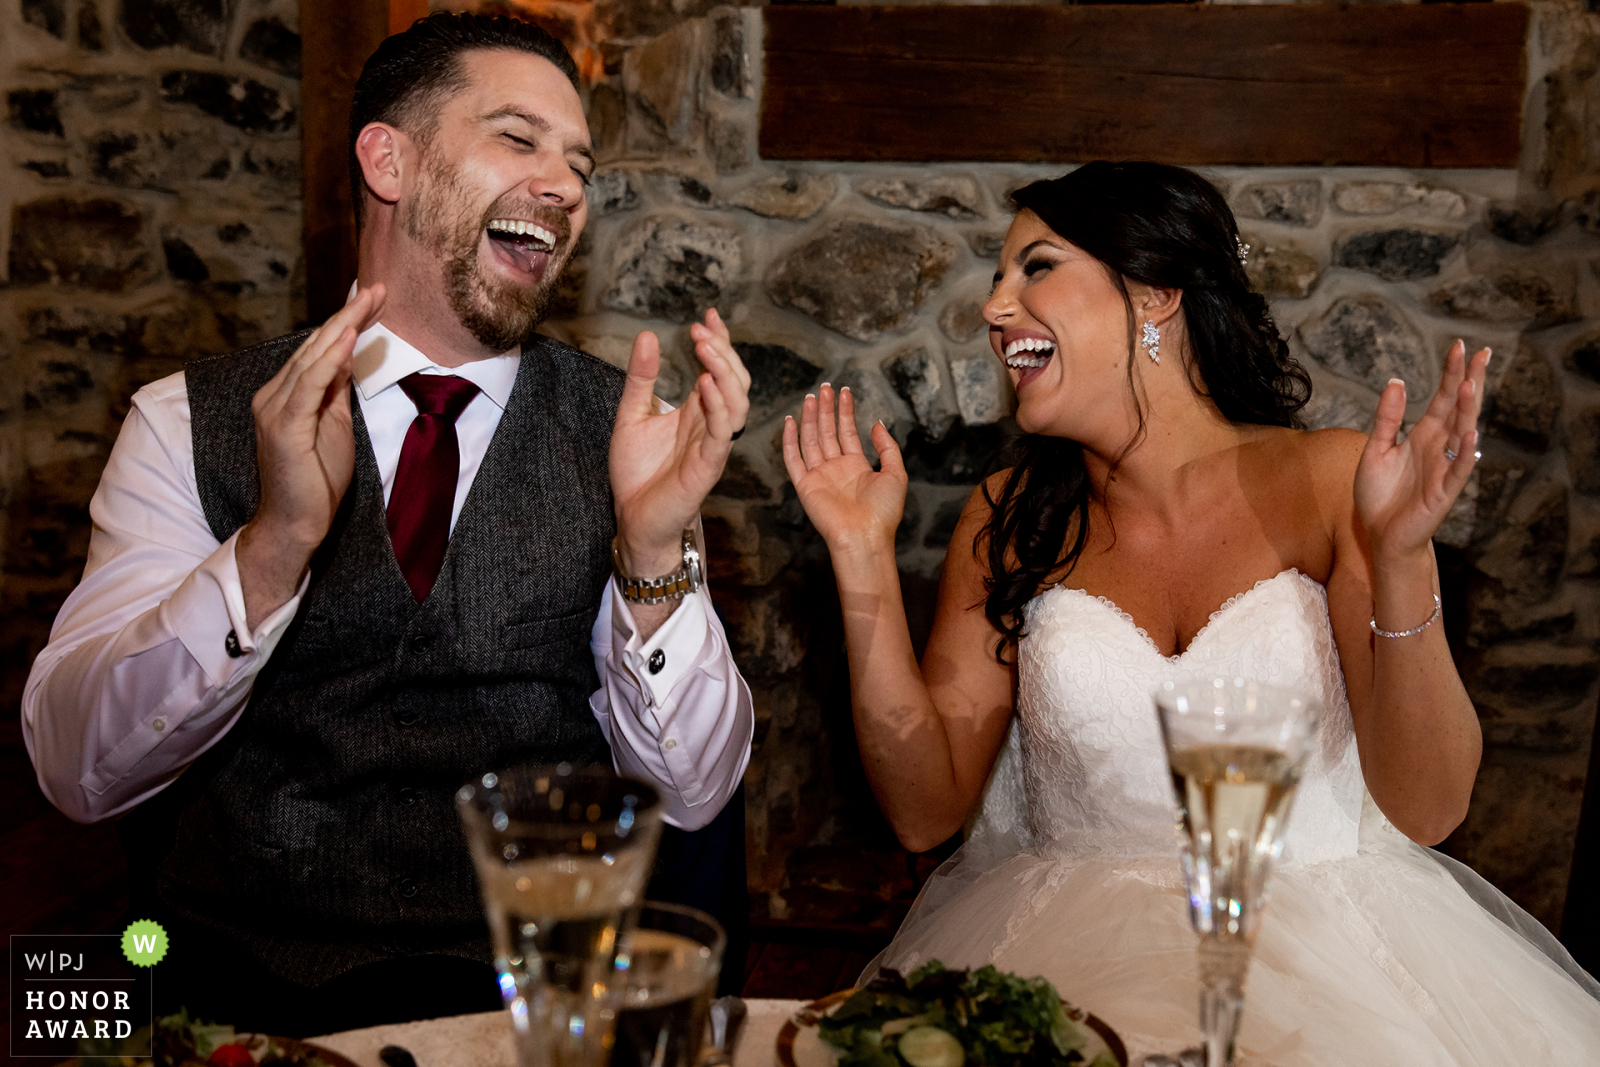 Award Winning Image from a Philadelphia wedding where the couple laugh at a toast